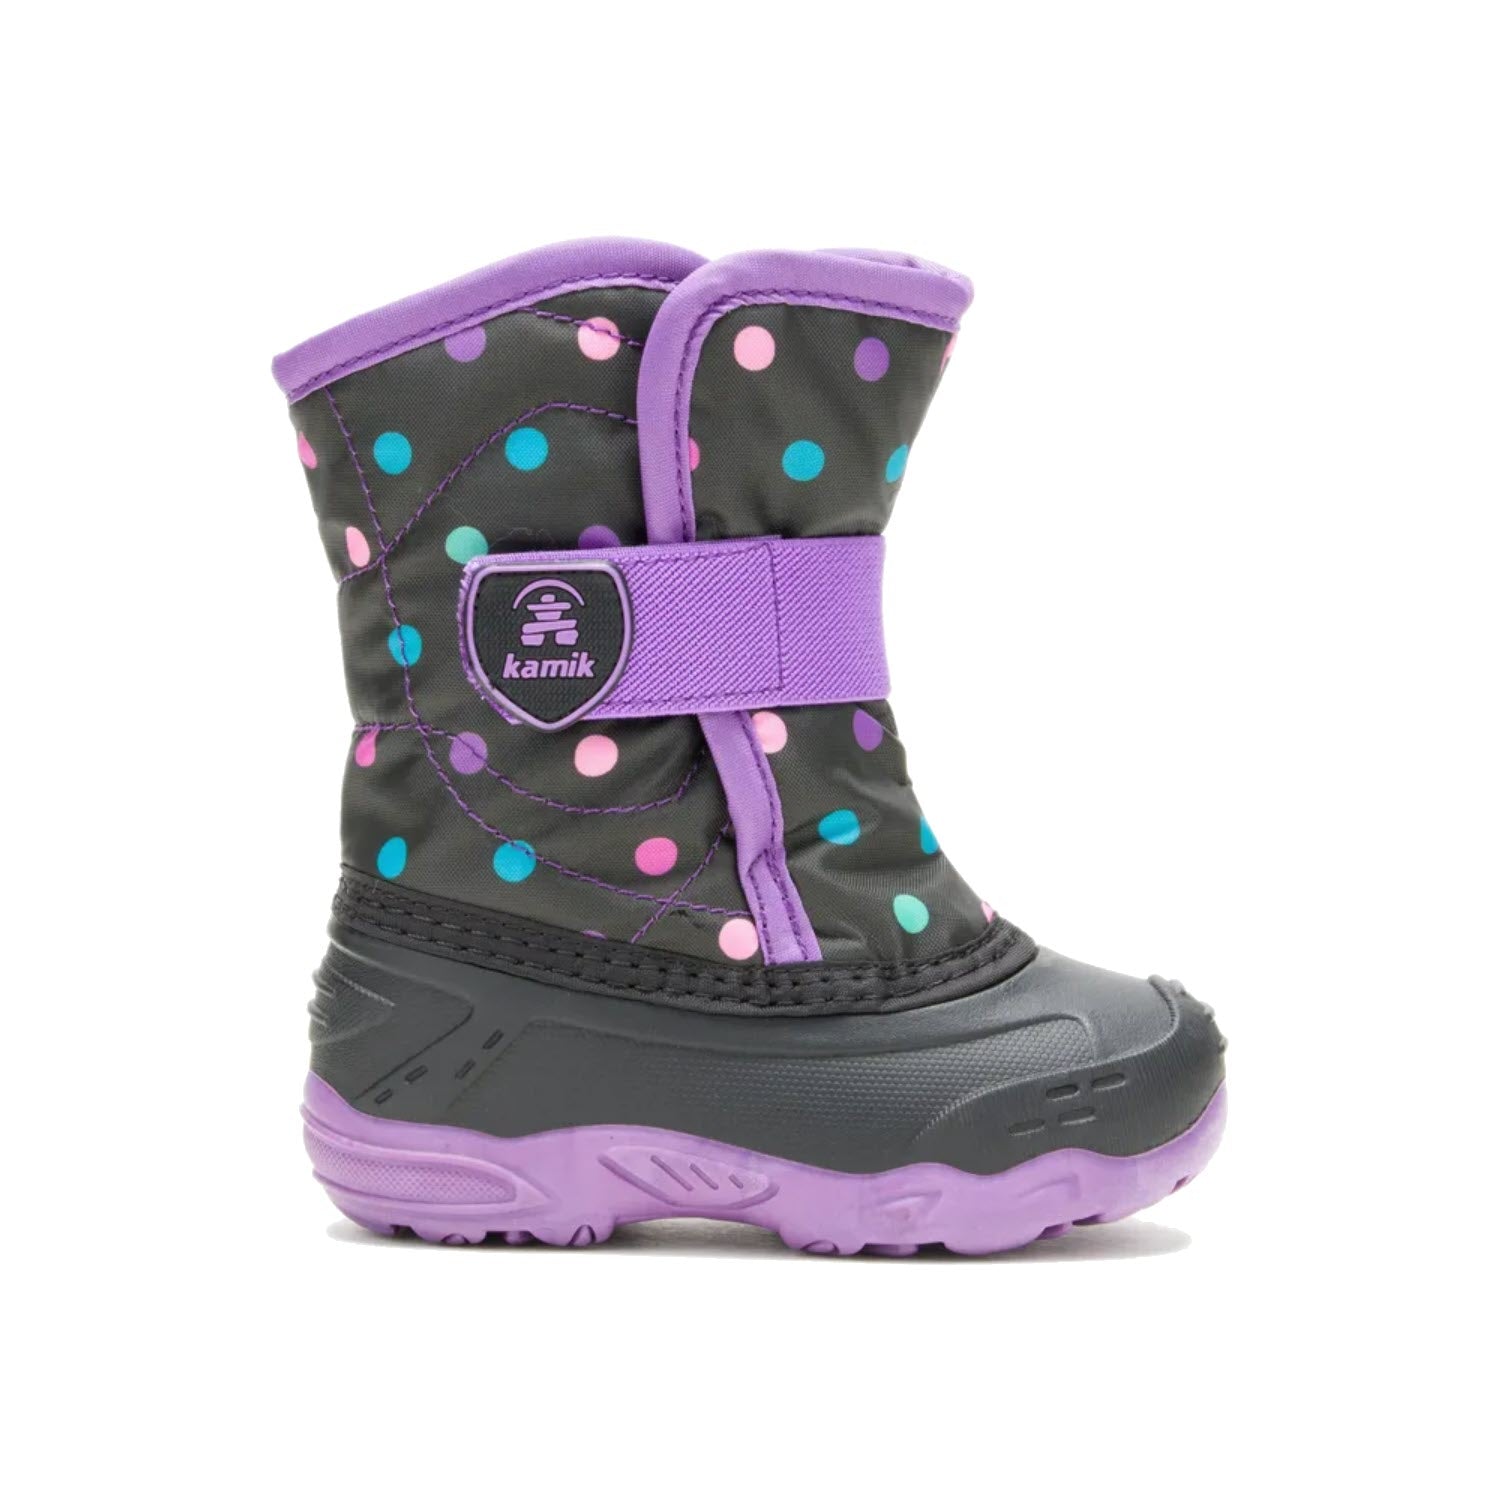 A Kamik toddler's winter boot with polka dots, purple accents, and a waterproof bottom.